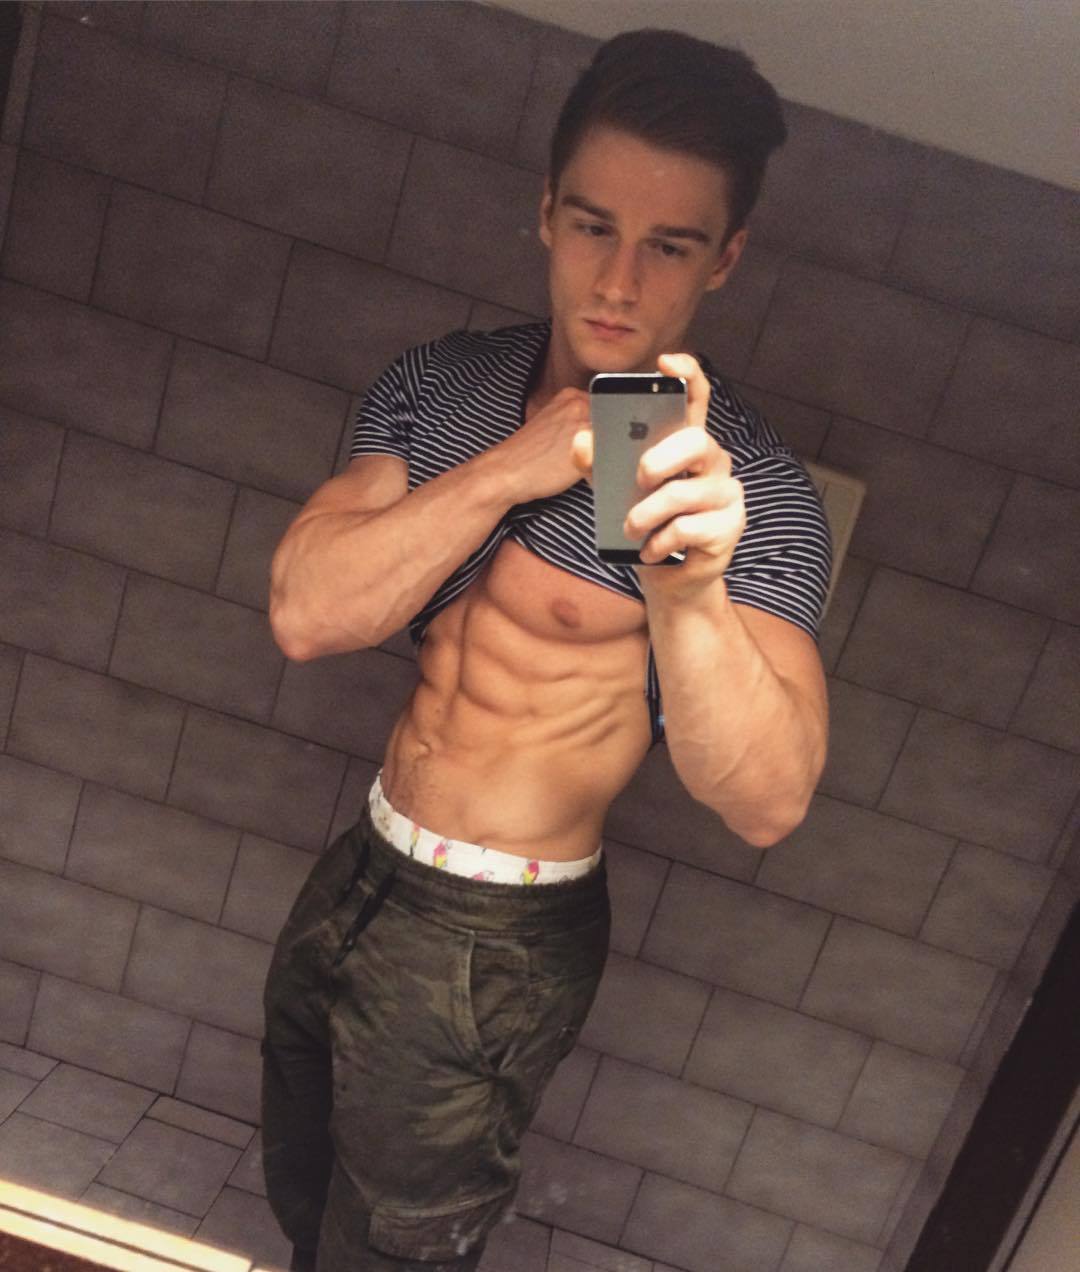 fit-straight-baited-guy-lifting-shirt-abs-pecs-selfie